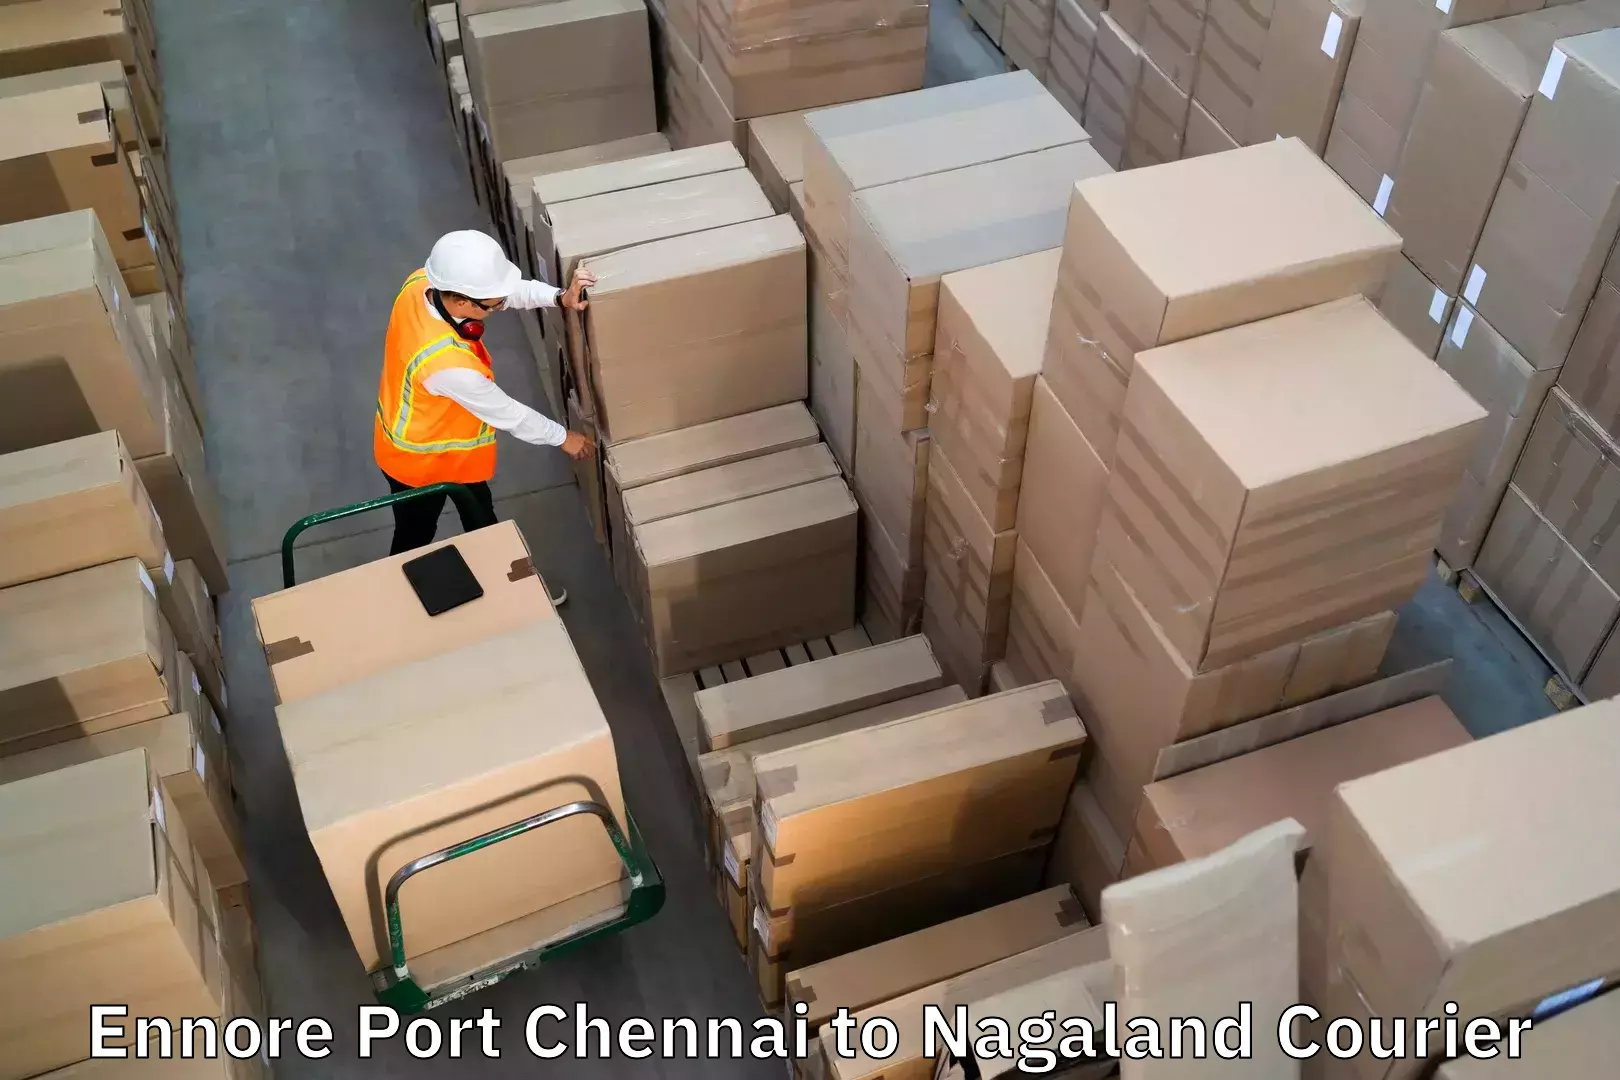 Baggage transport cost Ennore Port Chennai to Wokha